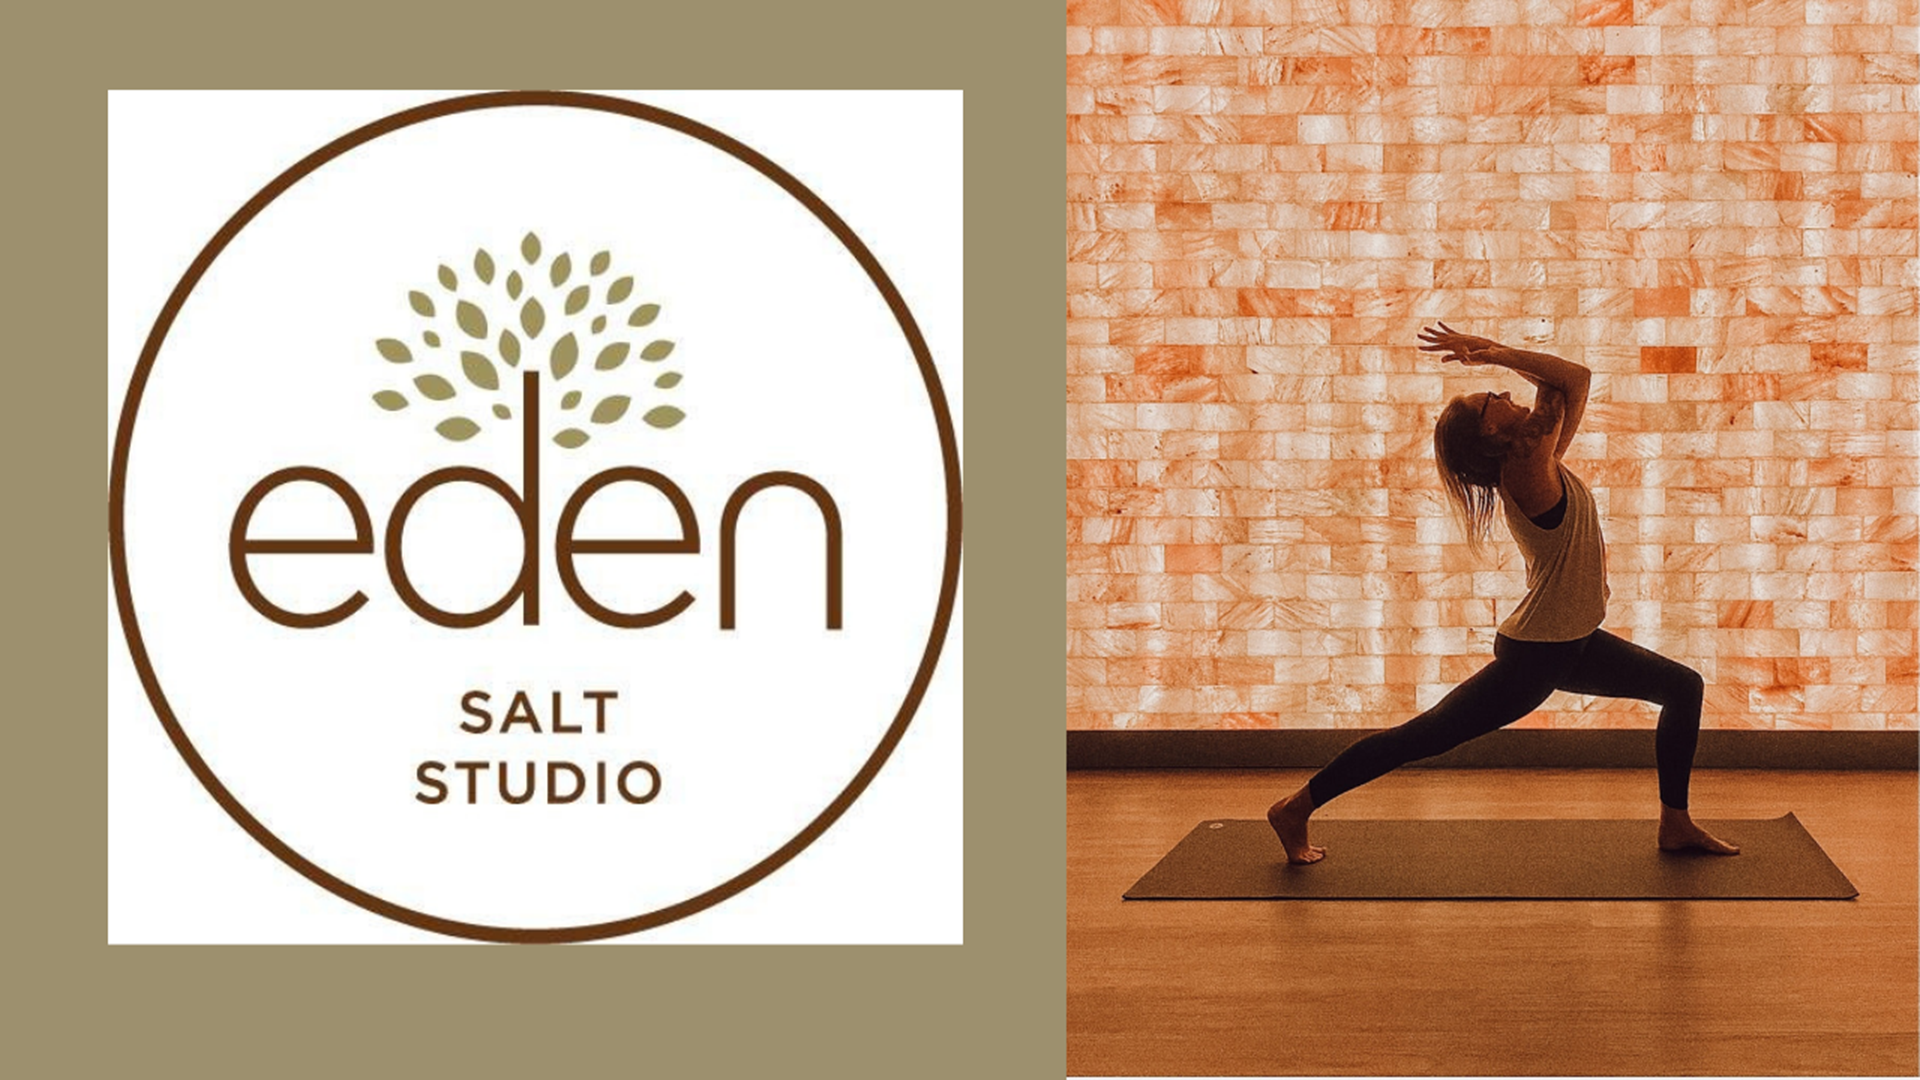 Owner Tori Jones shares what Eden Salt Studio is all about. They offer salt therapy sessions and yoga classes to help you destress, strengthen & feel better overall.